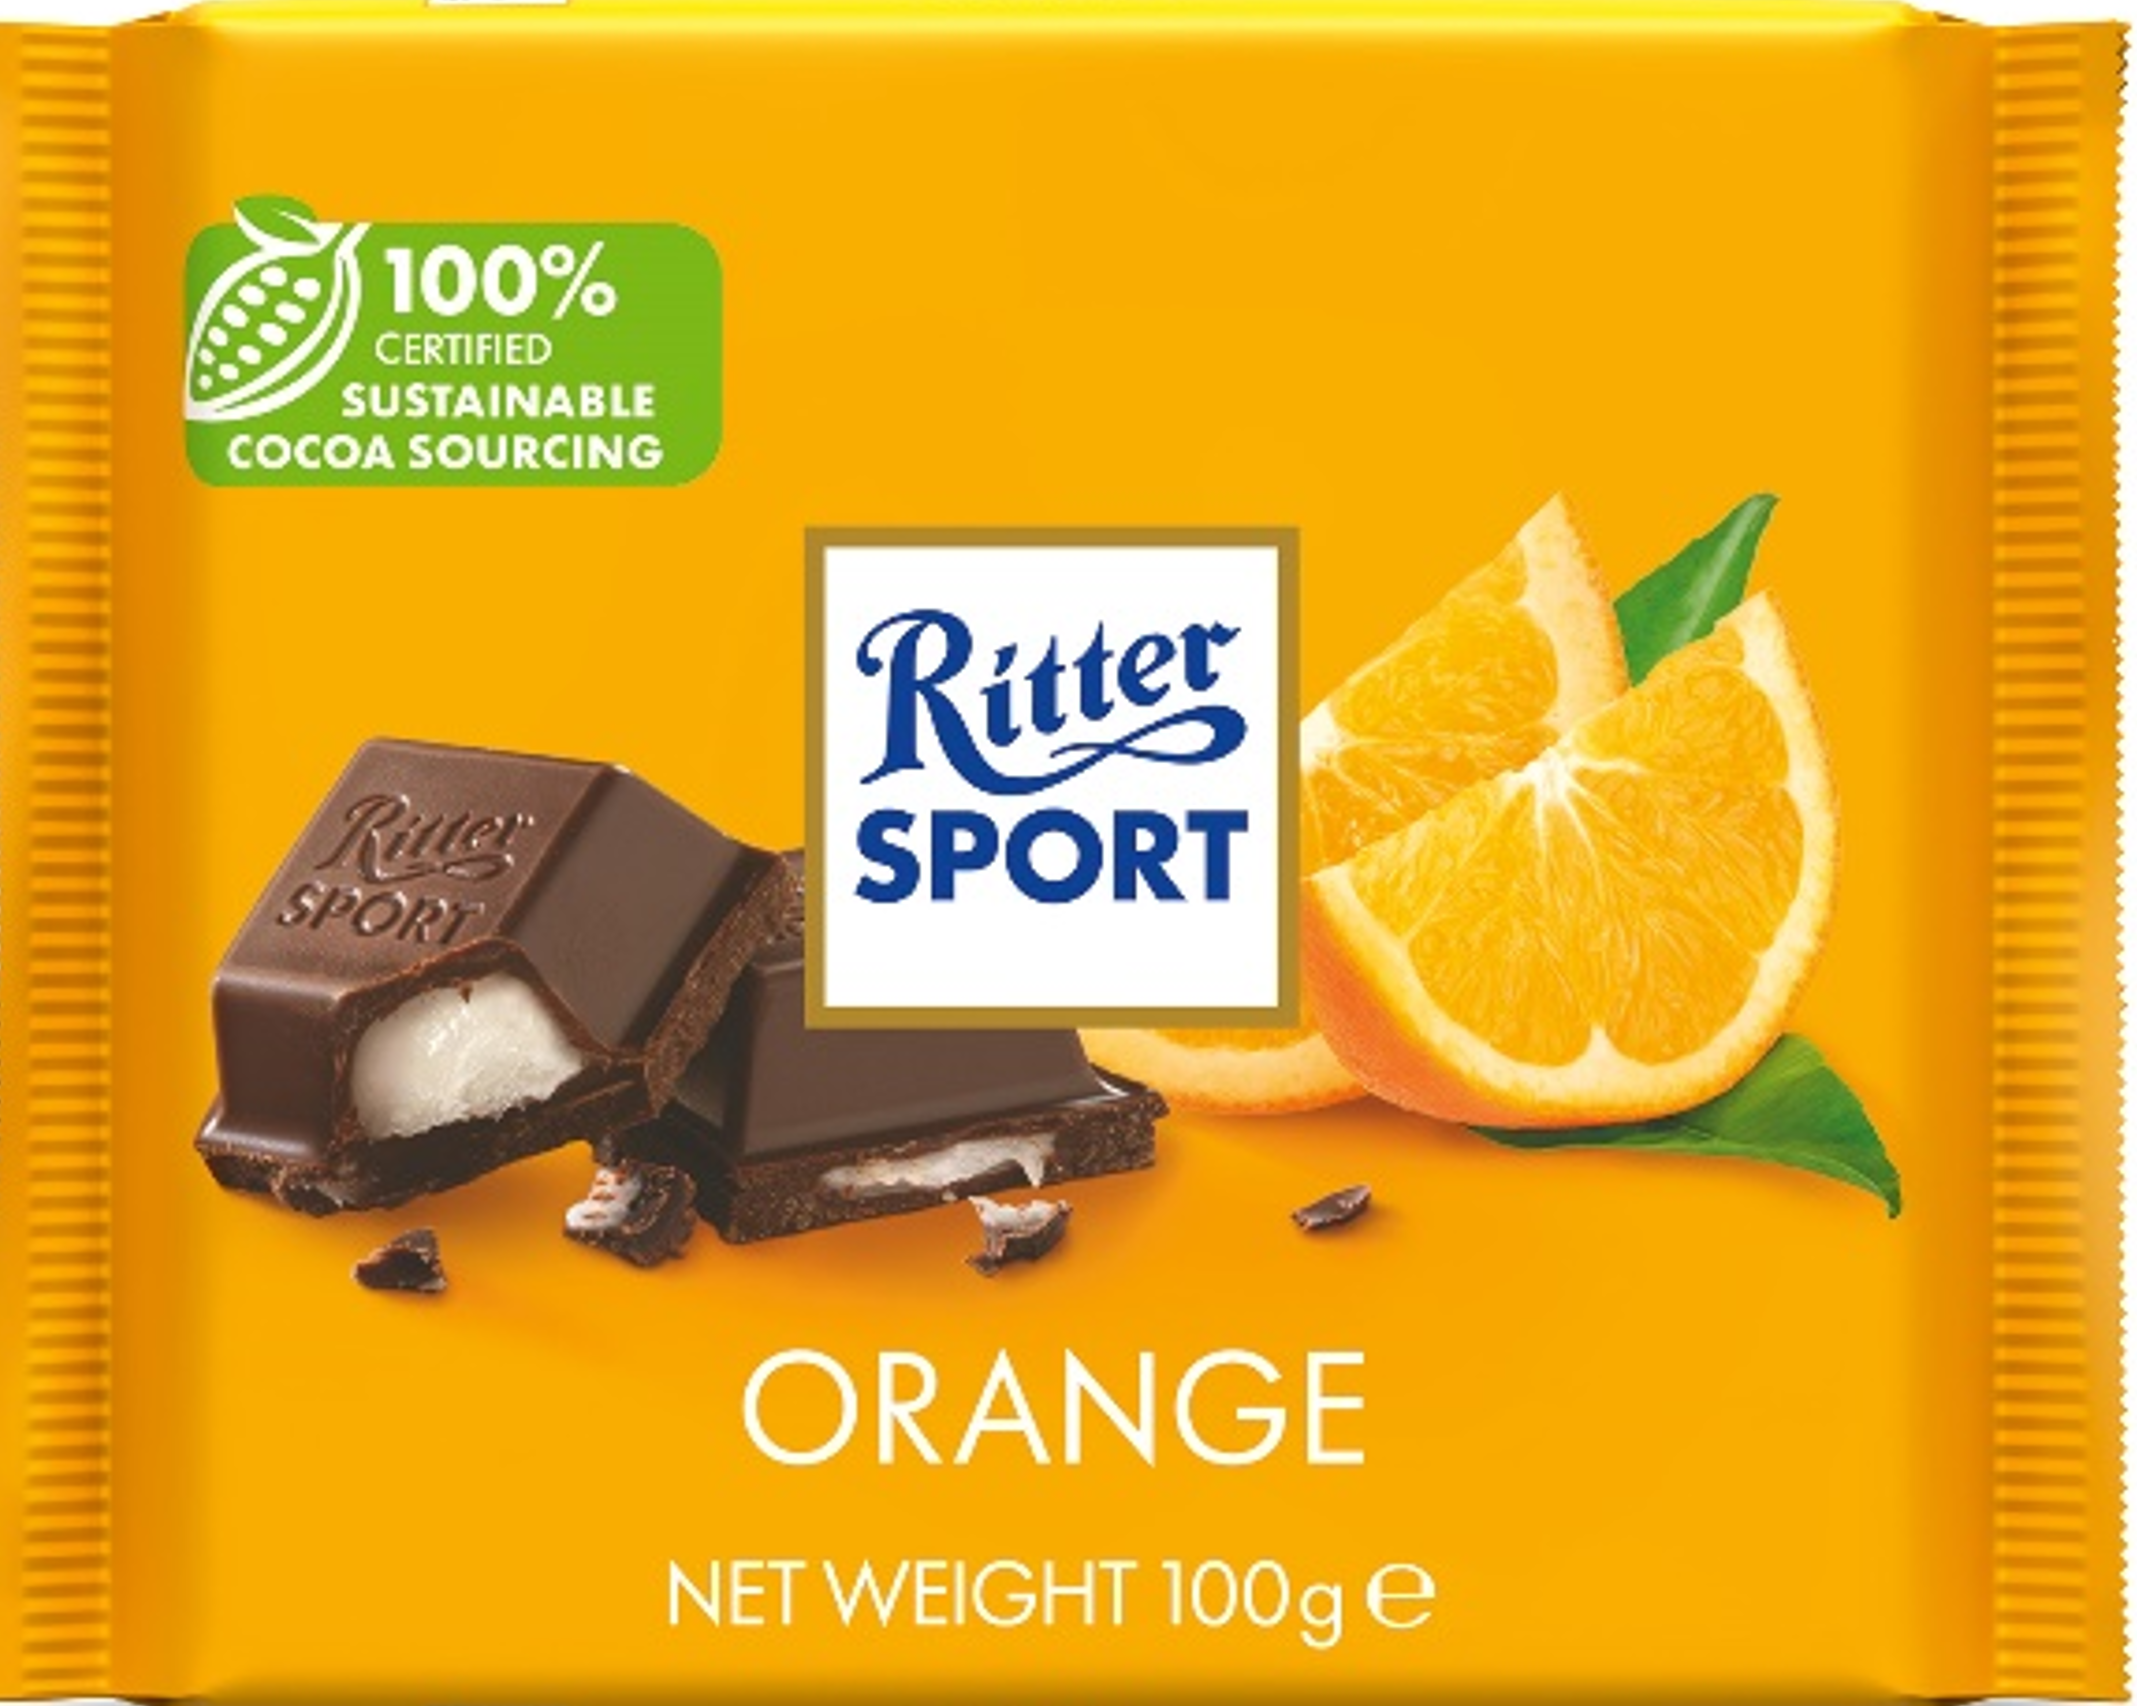 Ritter Sport launches new Salted Caramel and Orange bars